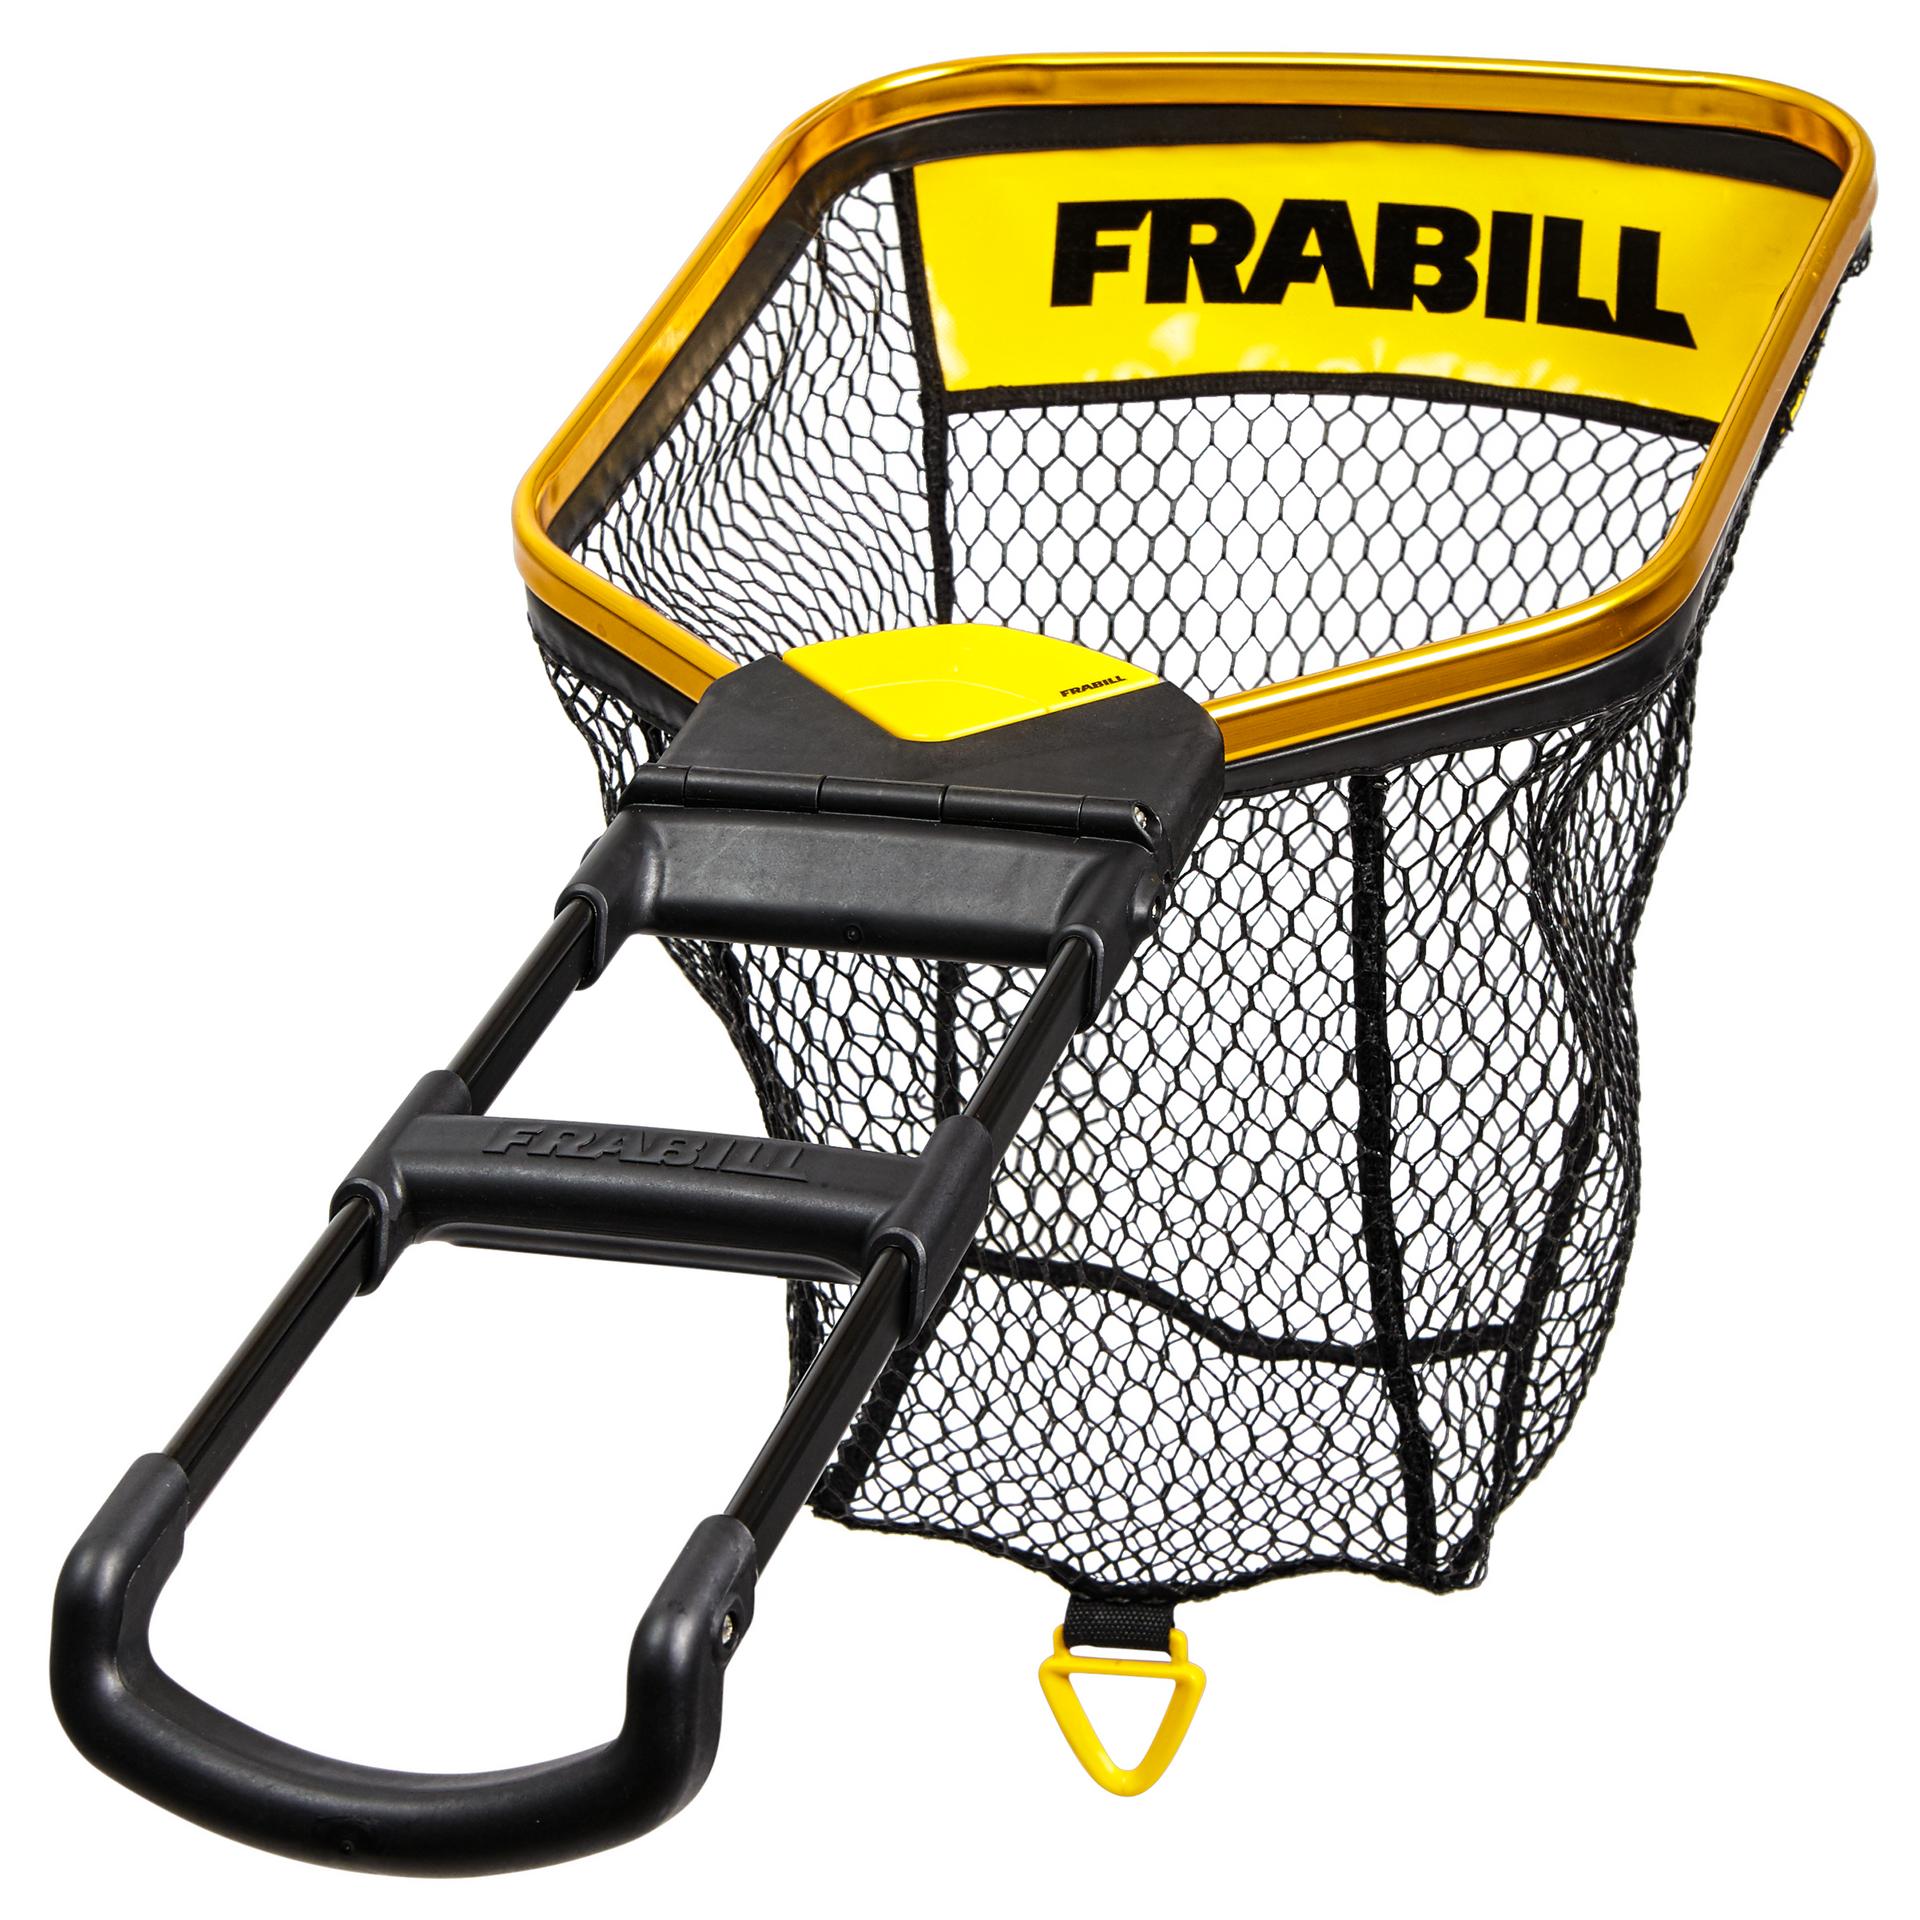 NEW FRABILL 3411 21 X 25 SCOOPED 36 FIXED HANDLE FISHING LANDING